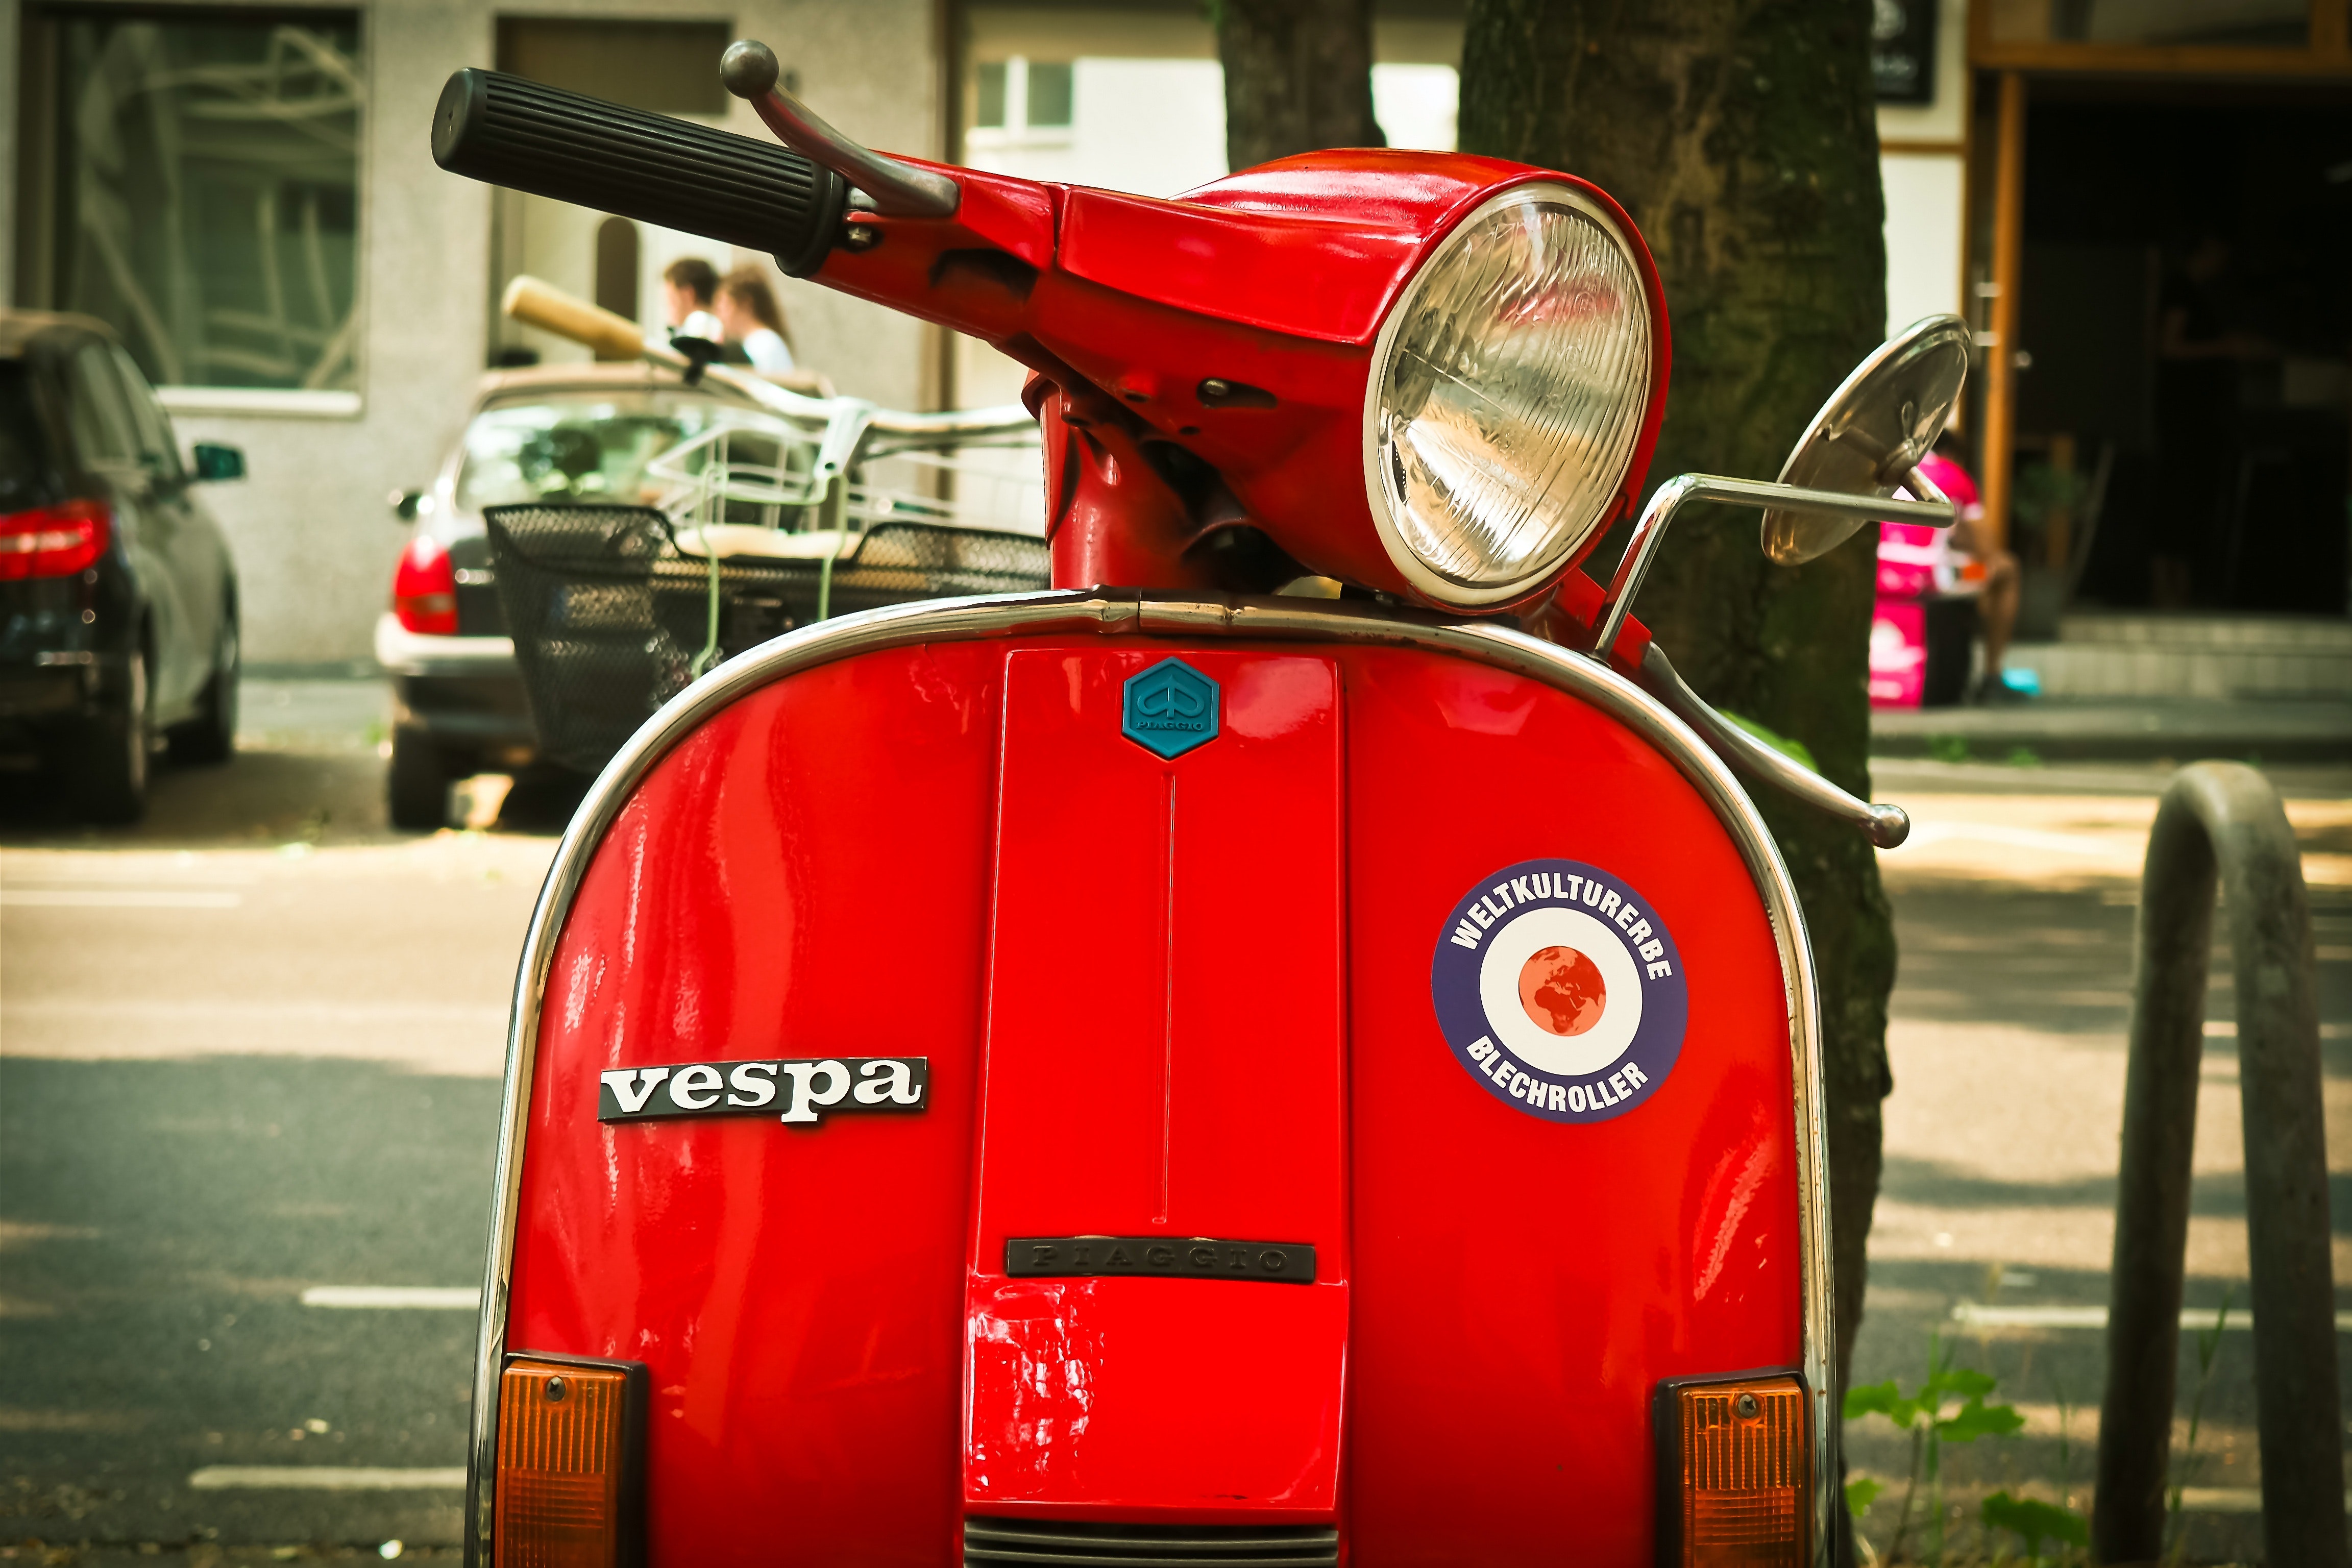 Red vespa motor scooter parked near tree during daytime photo